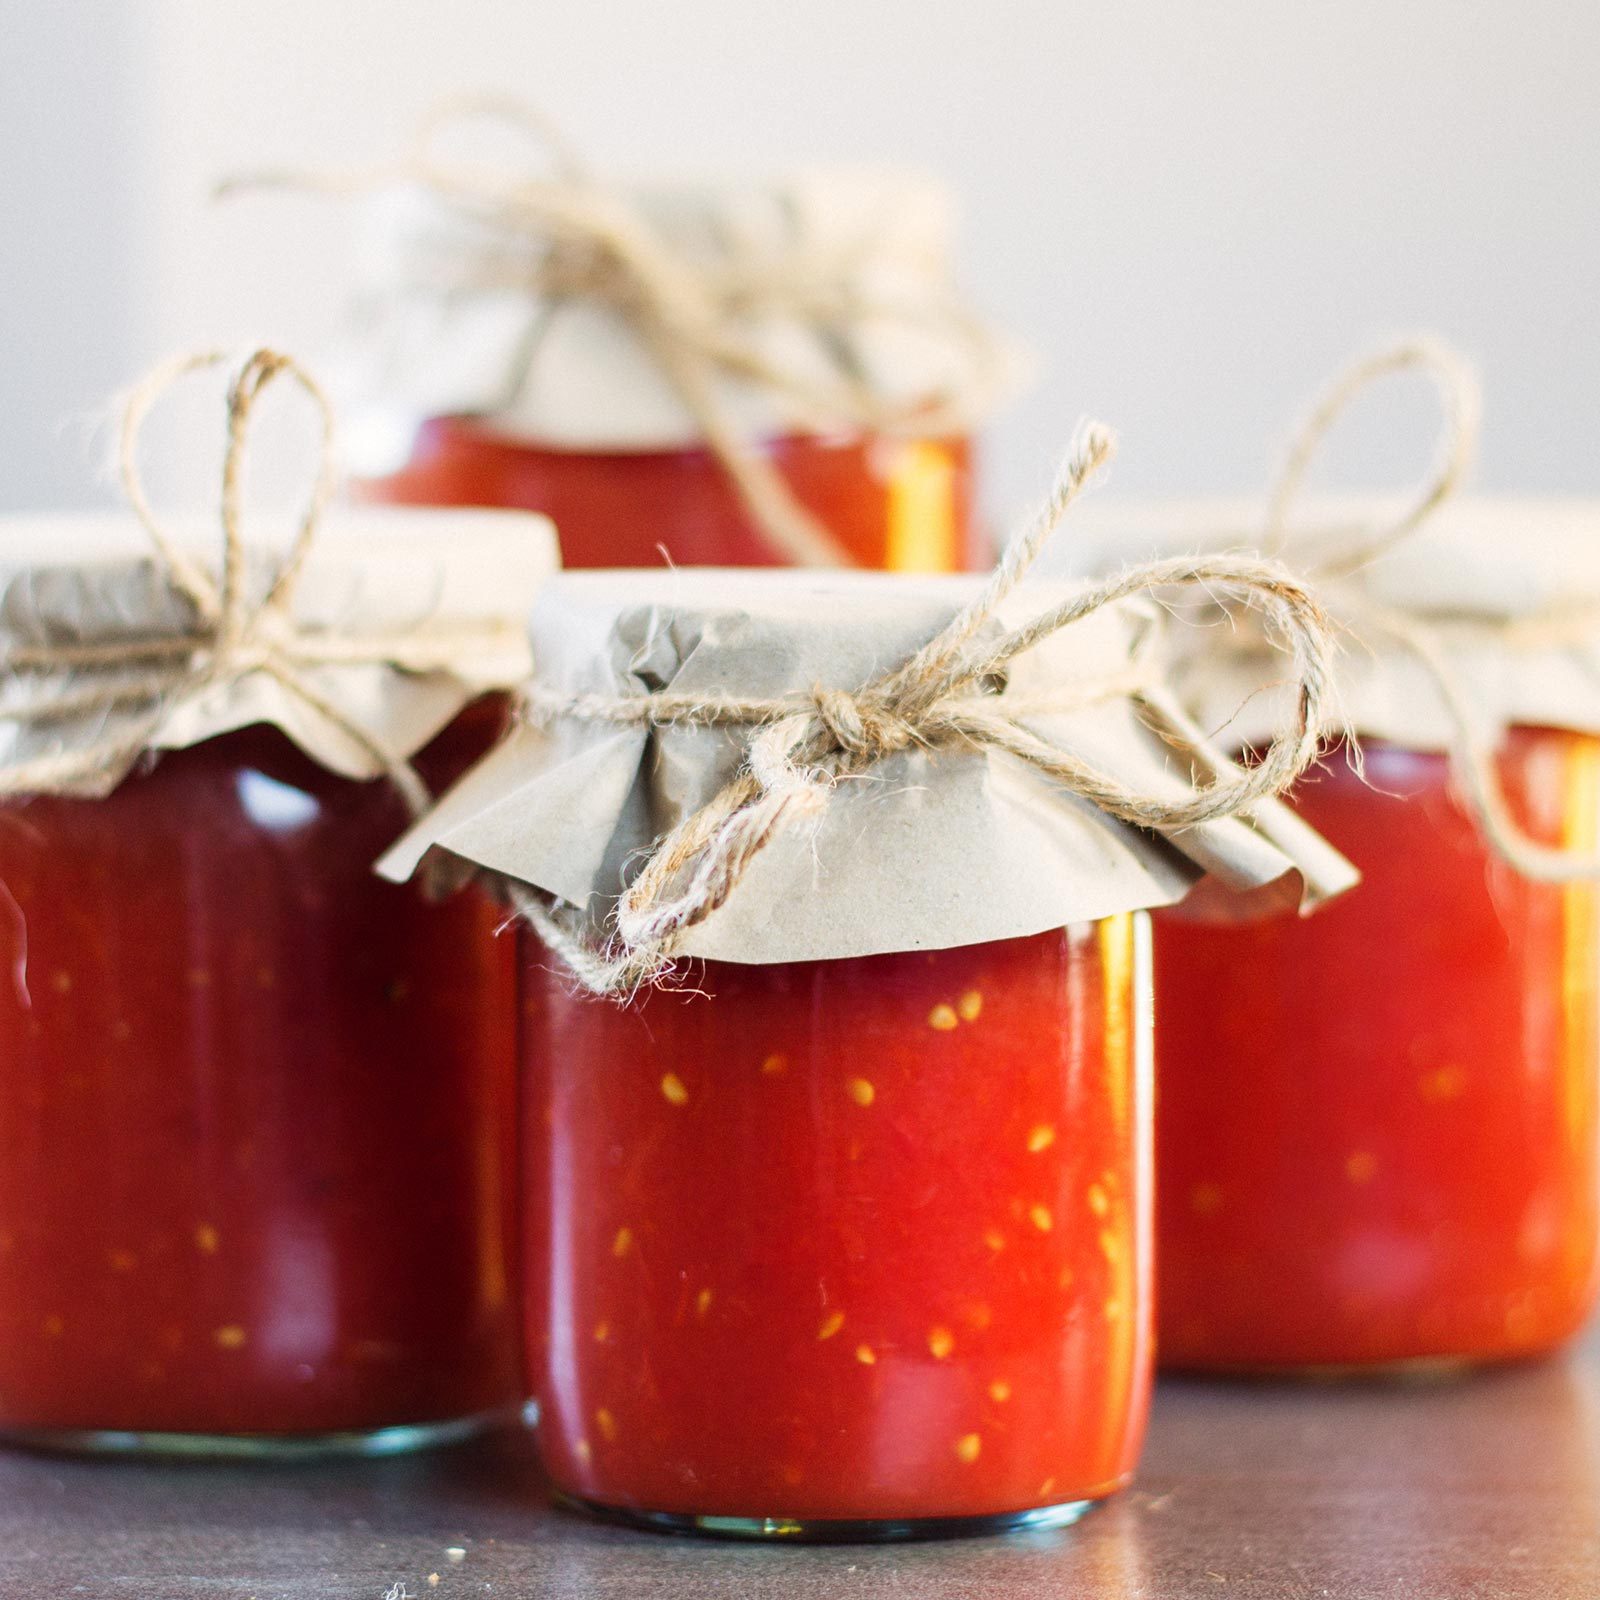 Homemade Tomato Paste In Jars with shallow focus